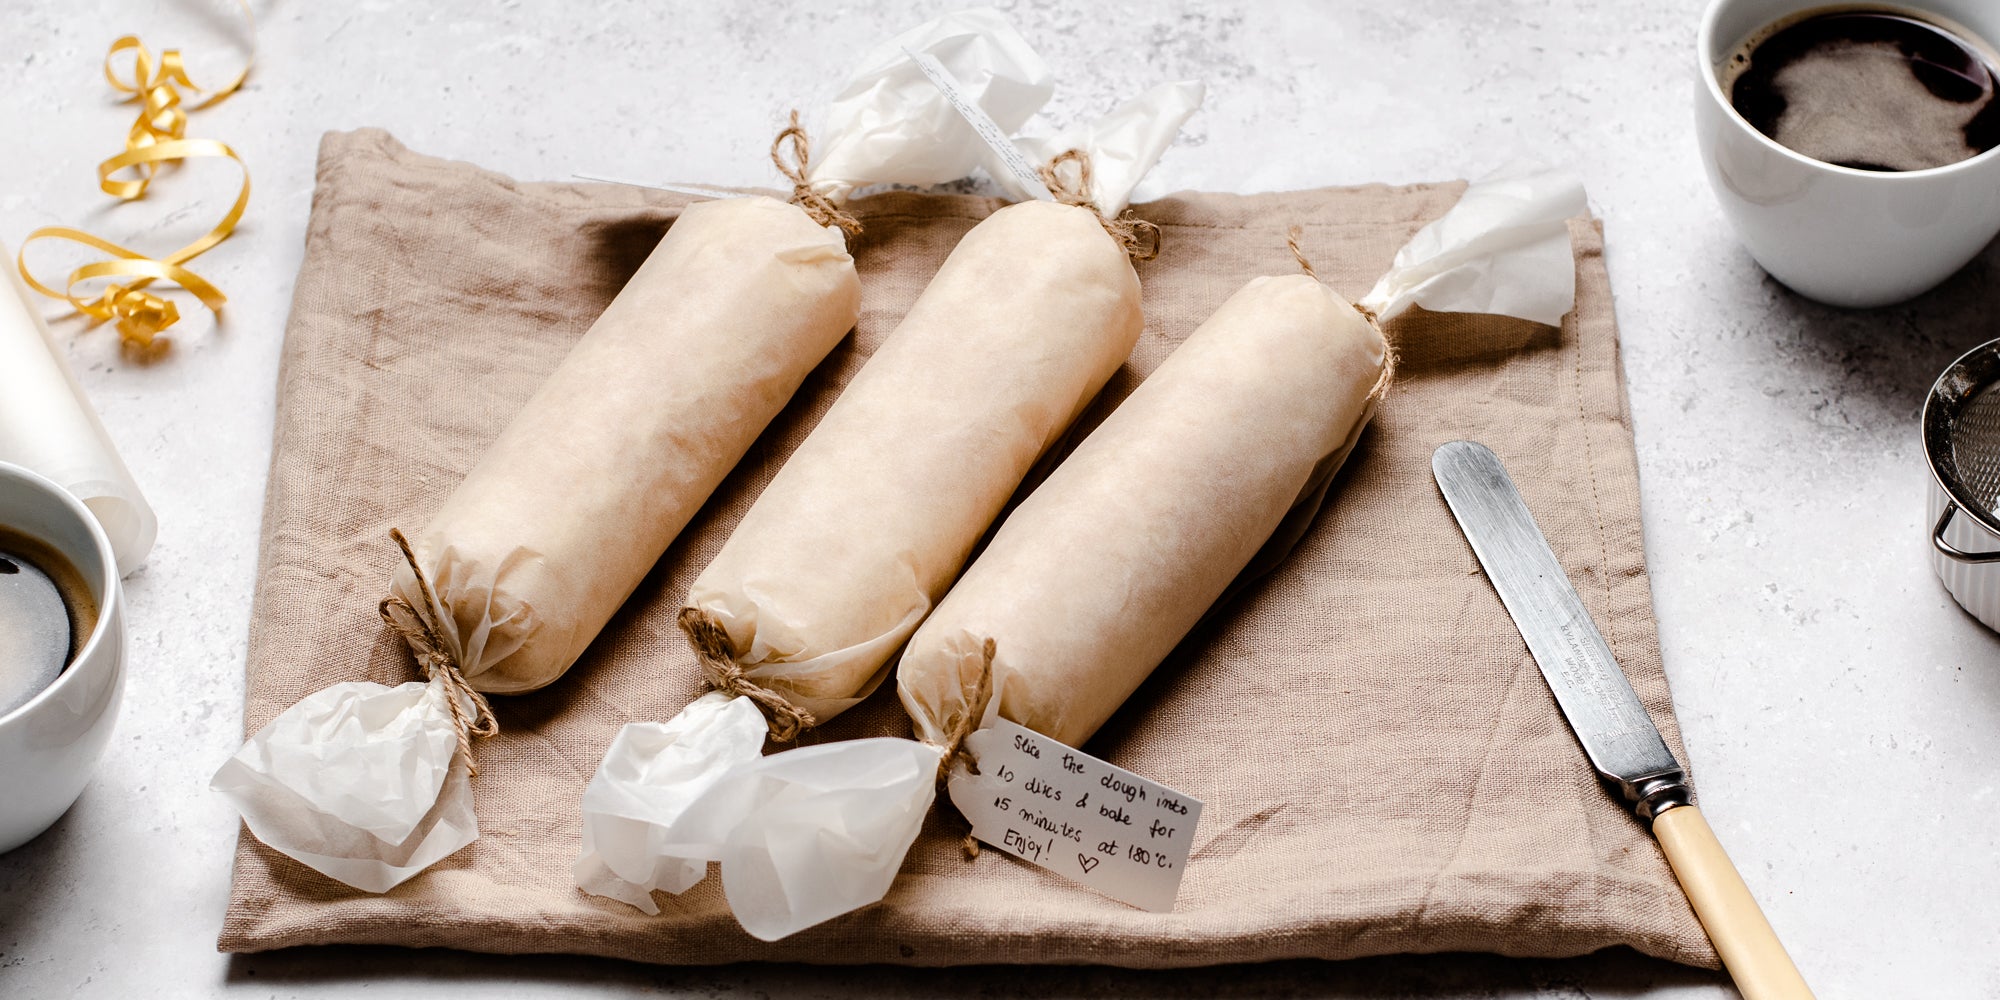 Shortbread Dough rolls wrapped in parchment and tied with a gold ribbon lay on a linen cloth. The rolls have handwritten notes to give the dough as a gift